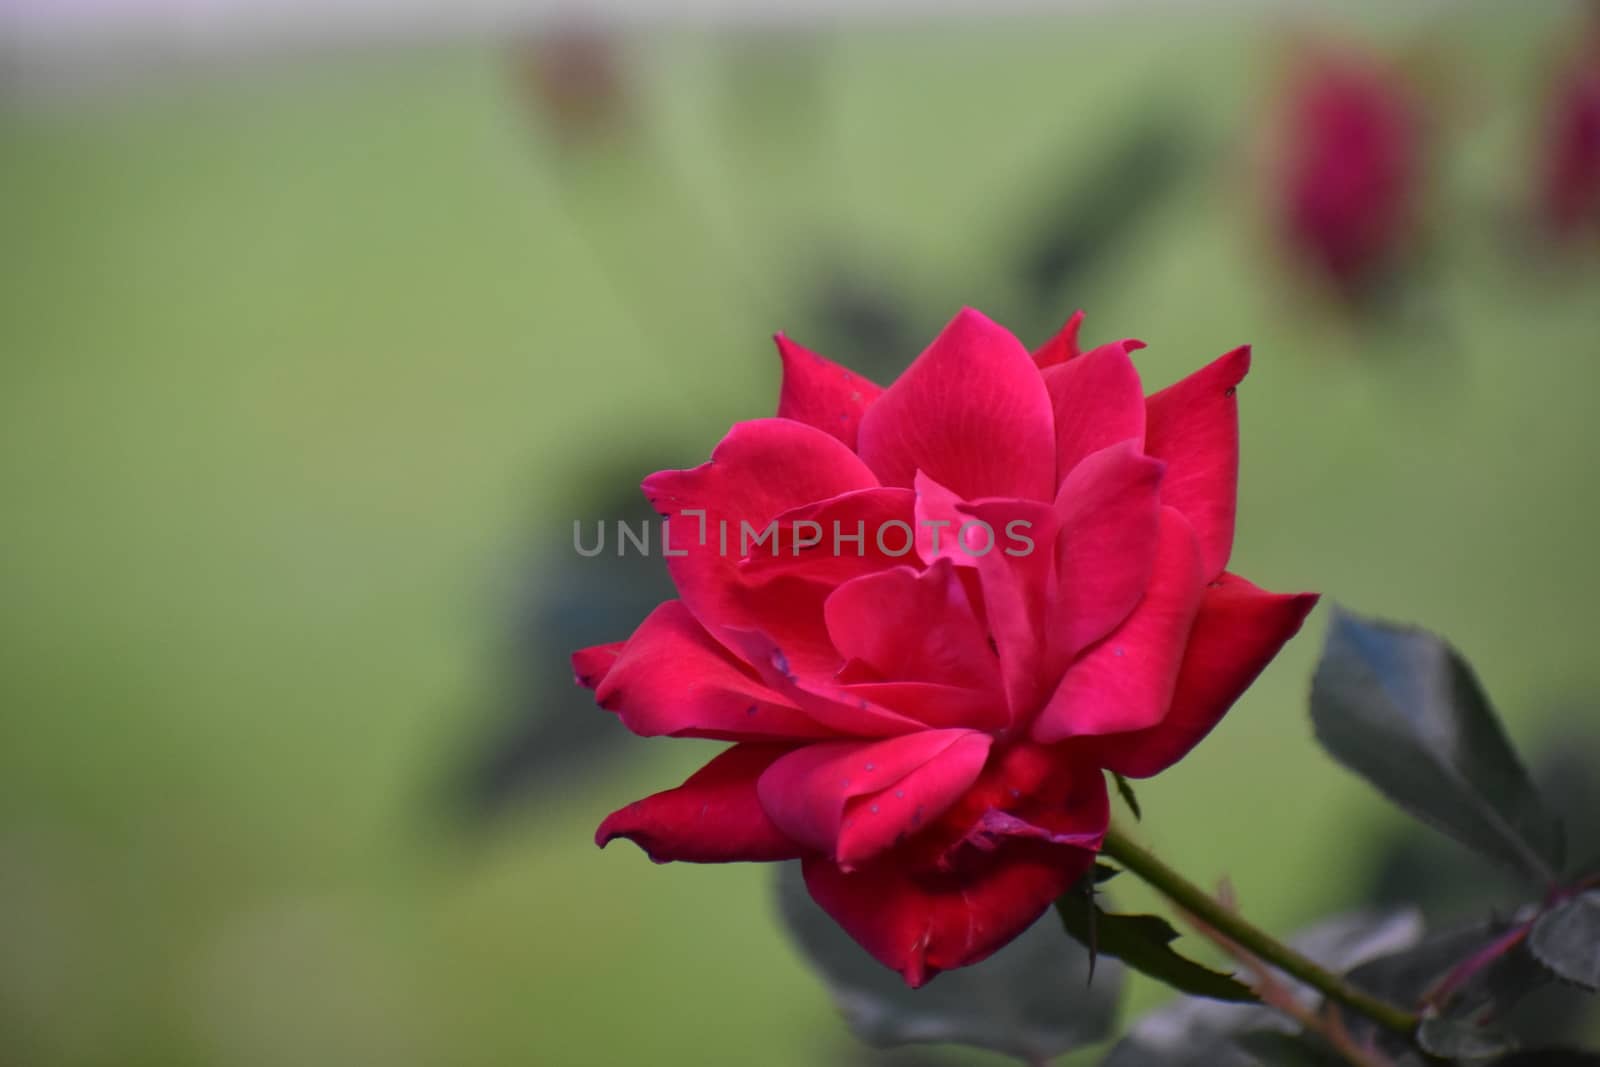 A Close Up Shot of a Red Rose With a Blurred Green Background